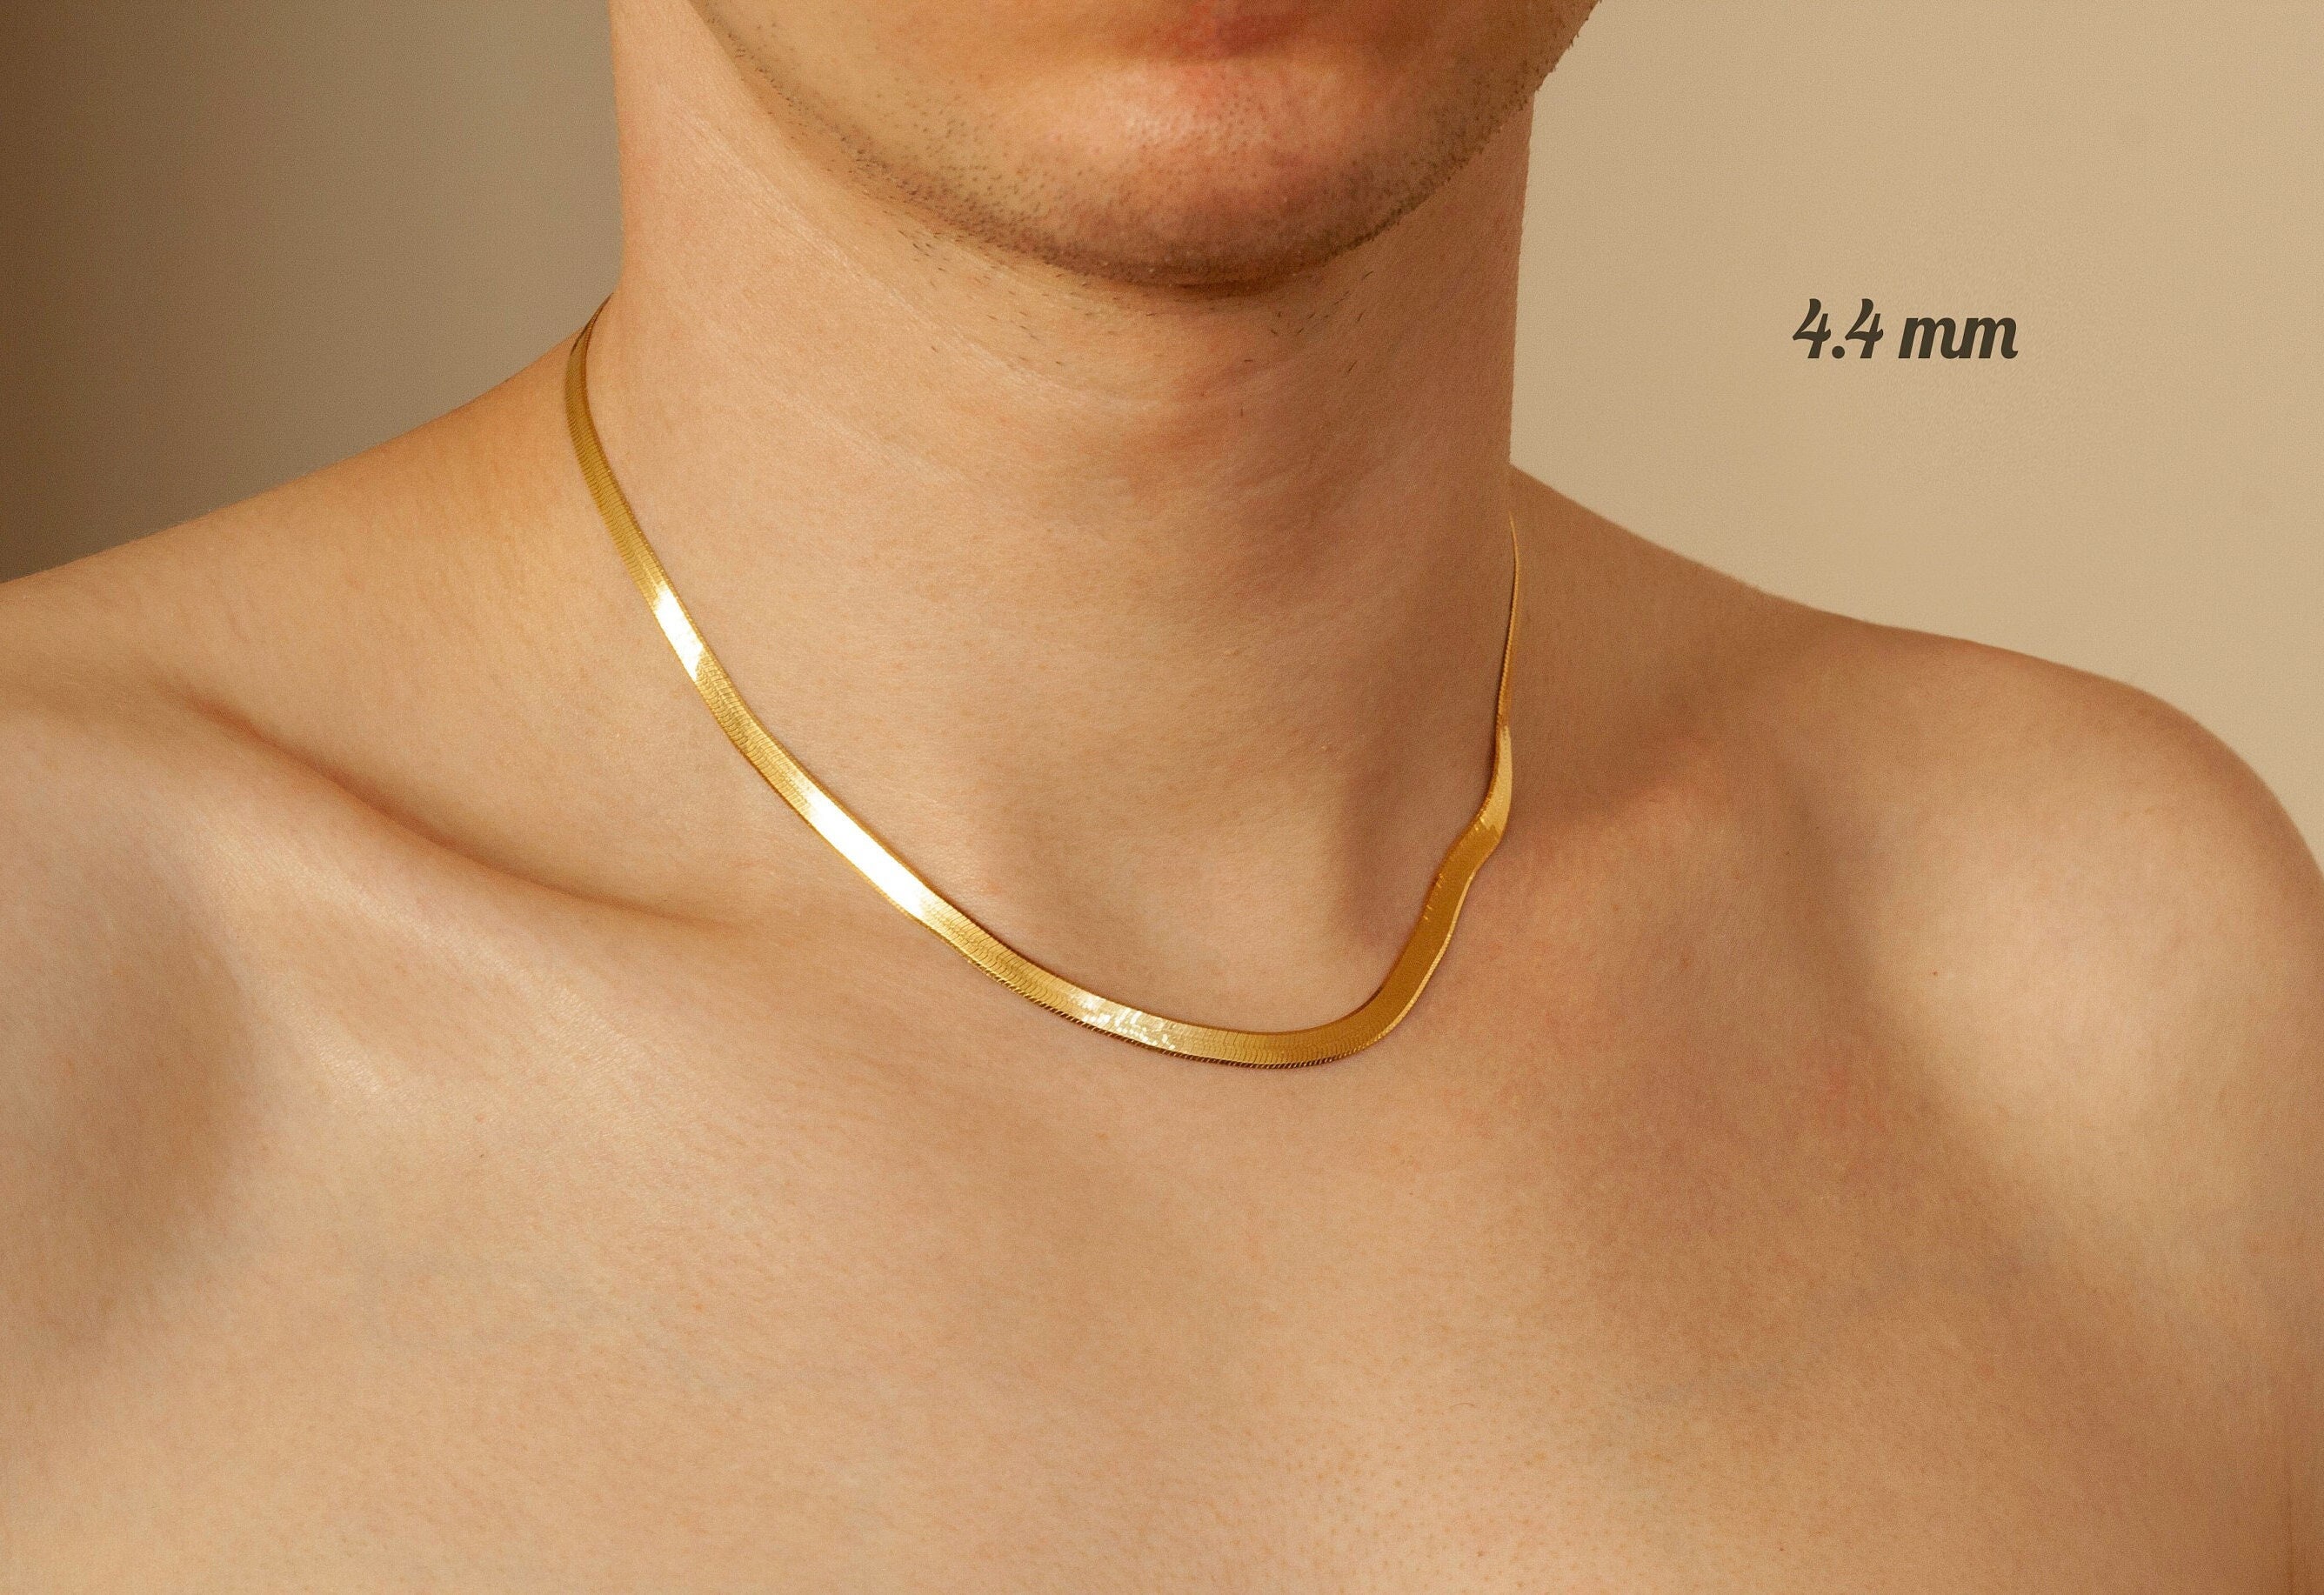 14K Solid Rose Gold Herringbone Chain Necklace, 16 18 20, 2.70mm